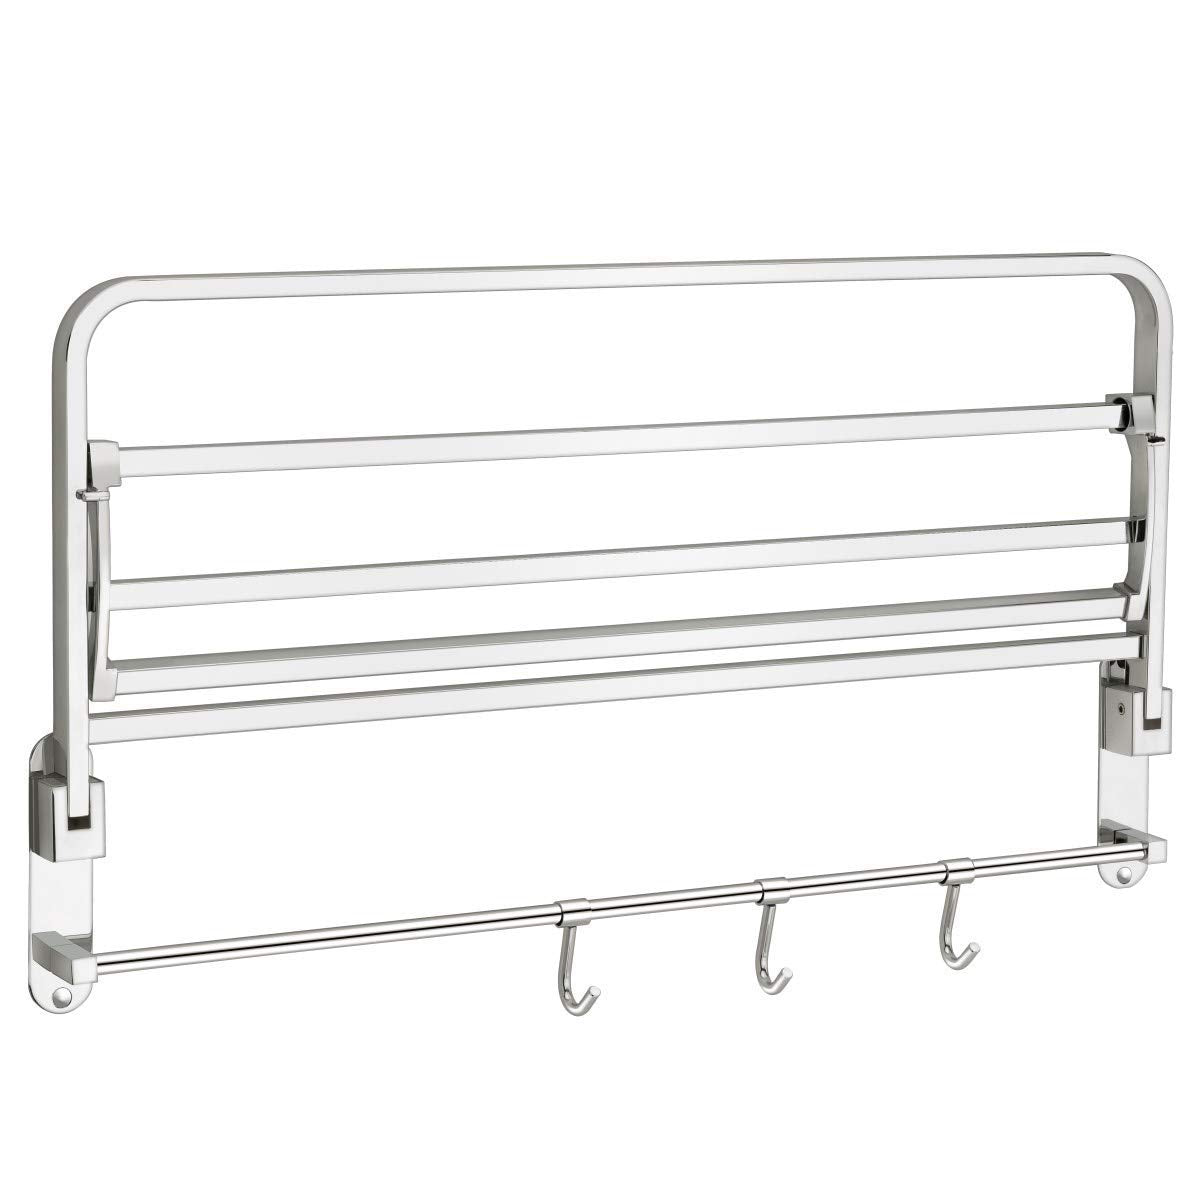 Plantex New Look Stainless Steel Folding Towel Rack for Bathroom / Towel Stand / Hanger / Bathroom Accessories (24 Inch-Chrome)